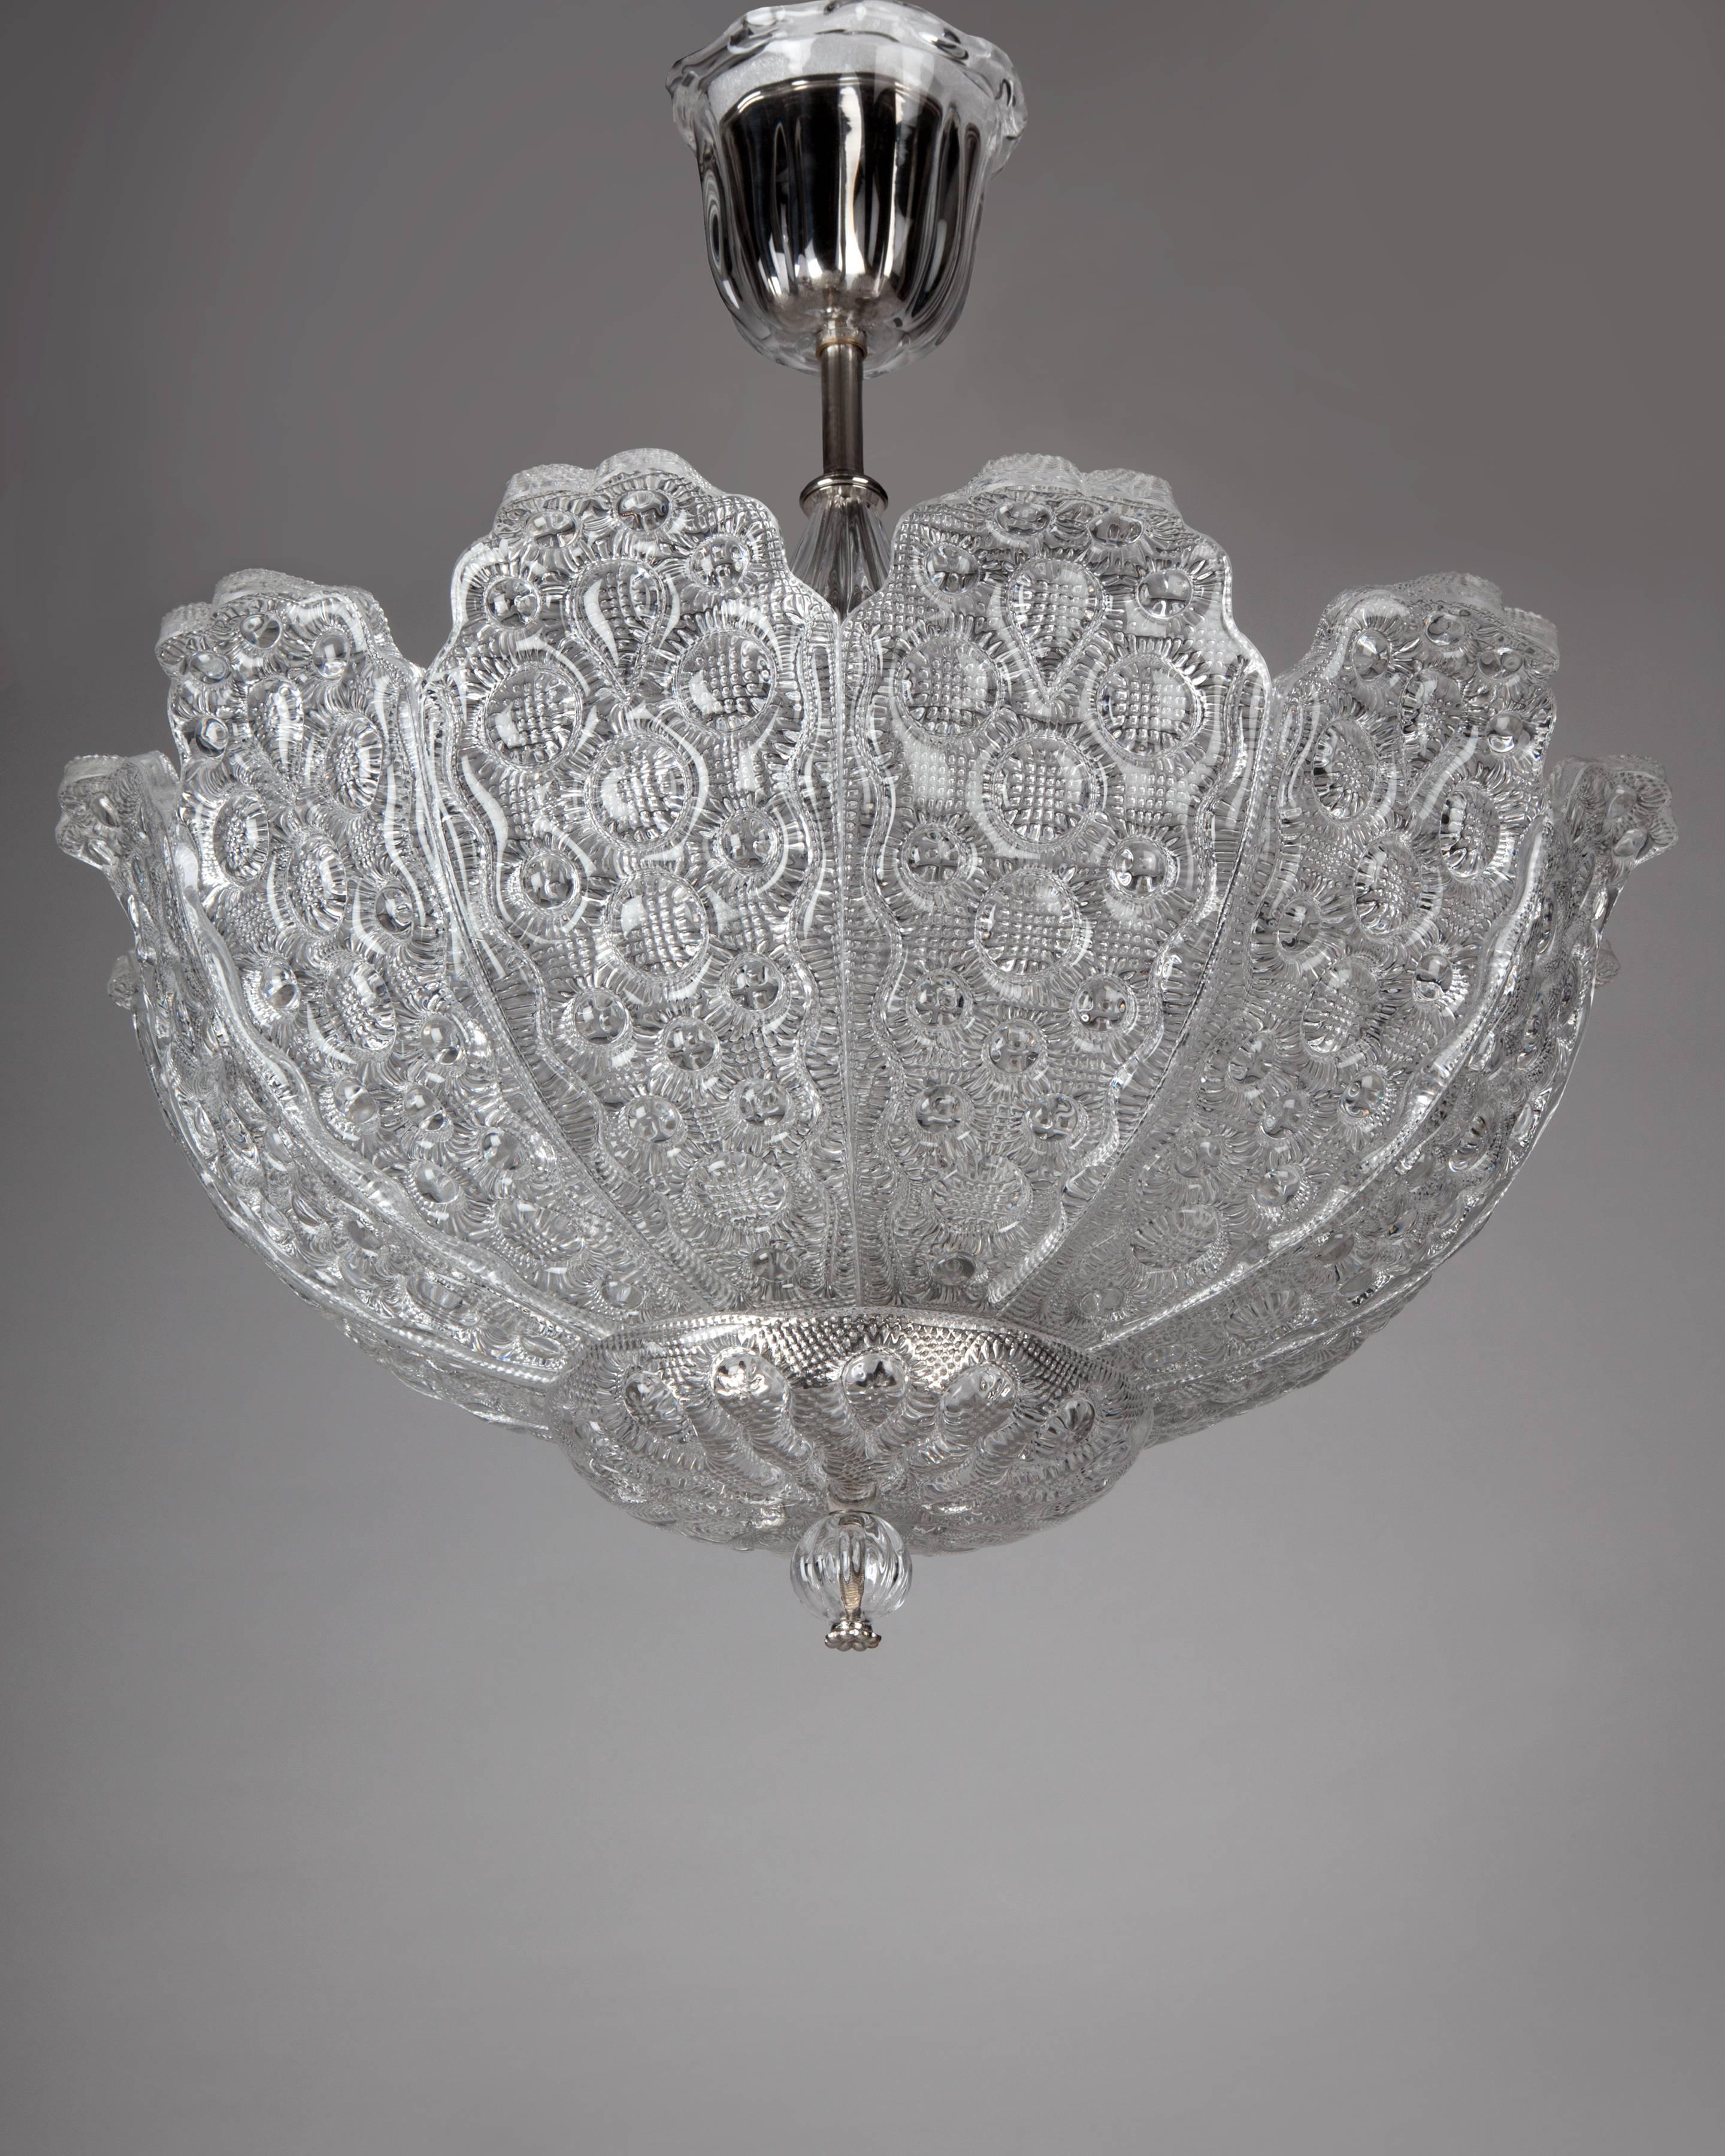 AHL4078

A vintage foliate-detailed glass chandelier with its original polished nickel fittings designed by Carl Fagerlund for the Swedish glassmaker Orrefors. Due to the antique nature of this fixture, there may be some nicks or imperfections in